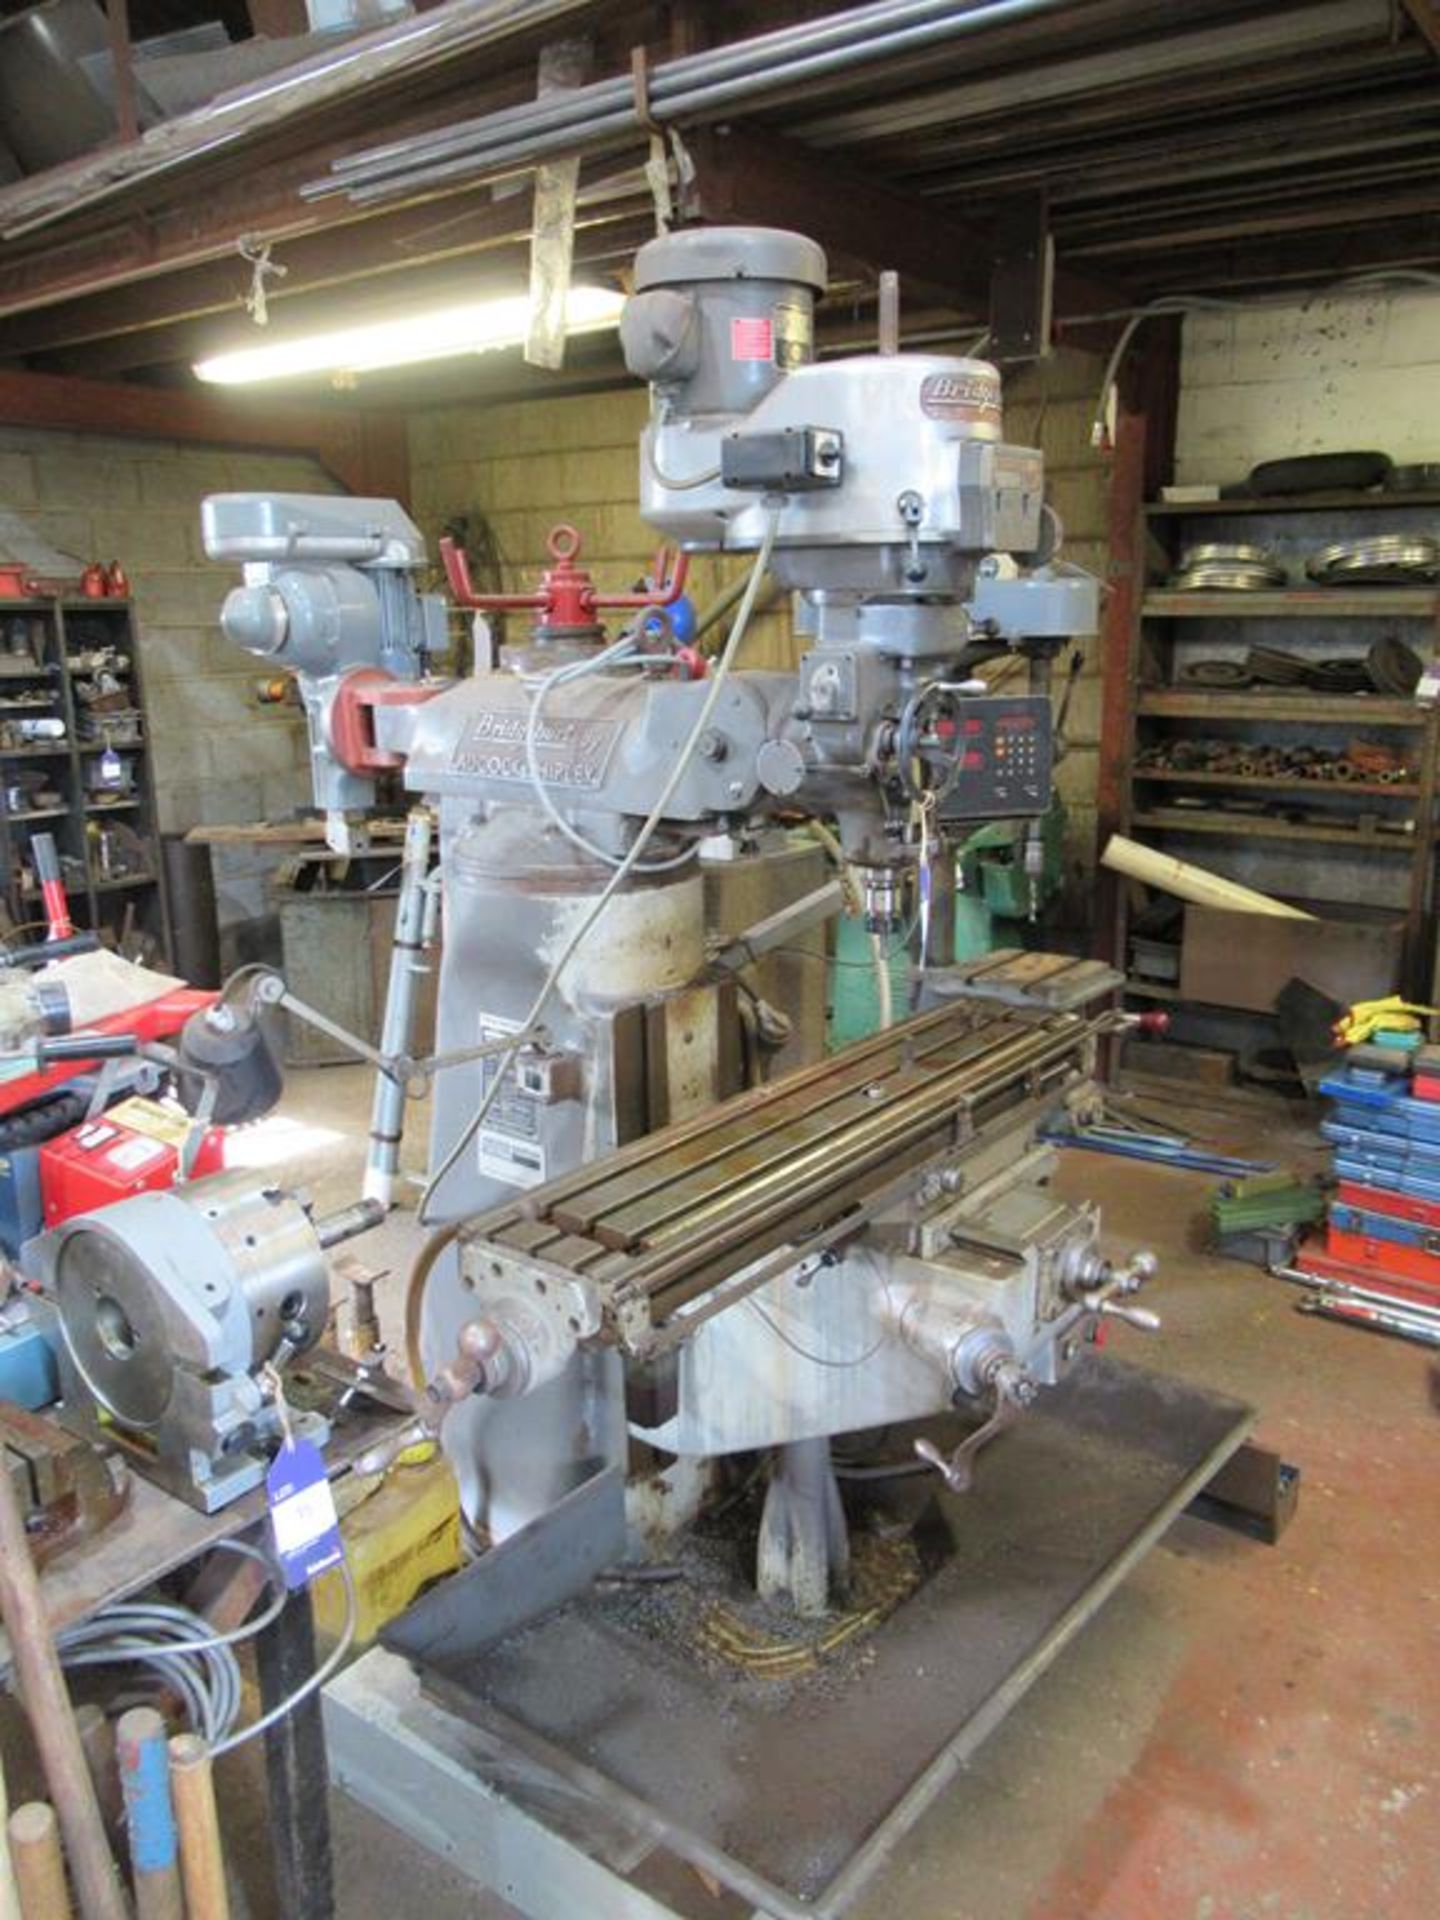 Bridgeport series I 2HP turret mill with shaping attachment, power feed and two axis Dro